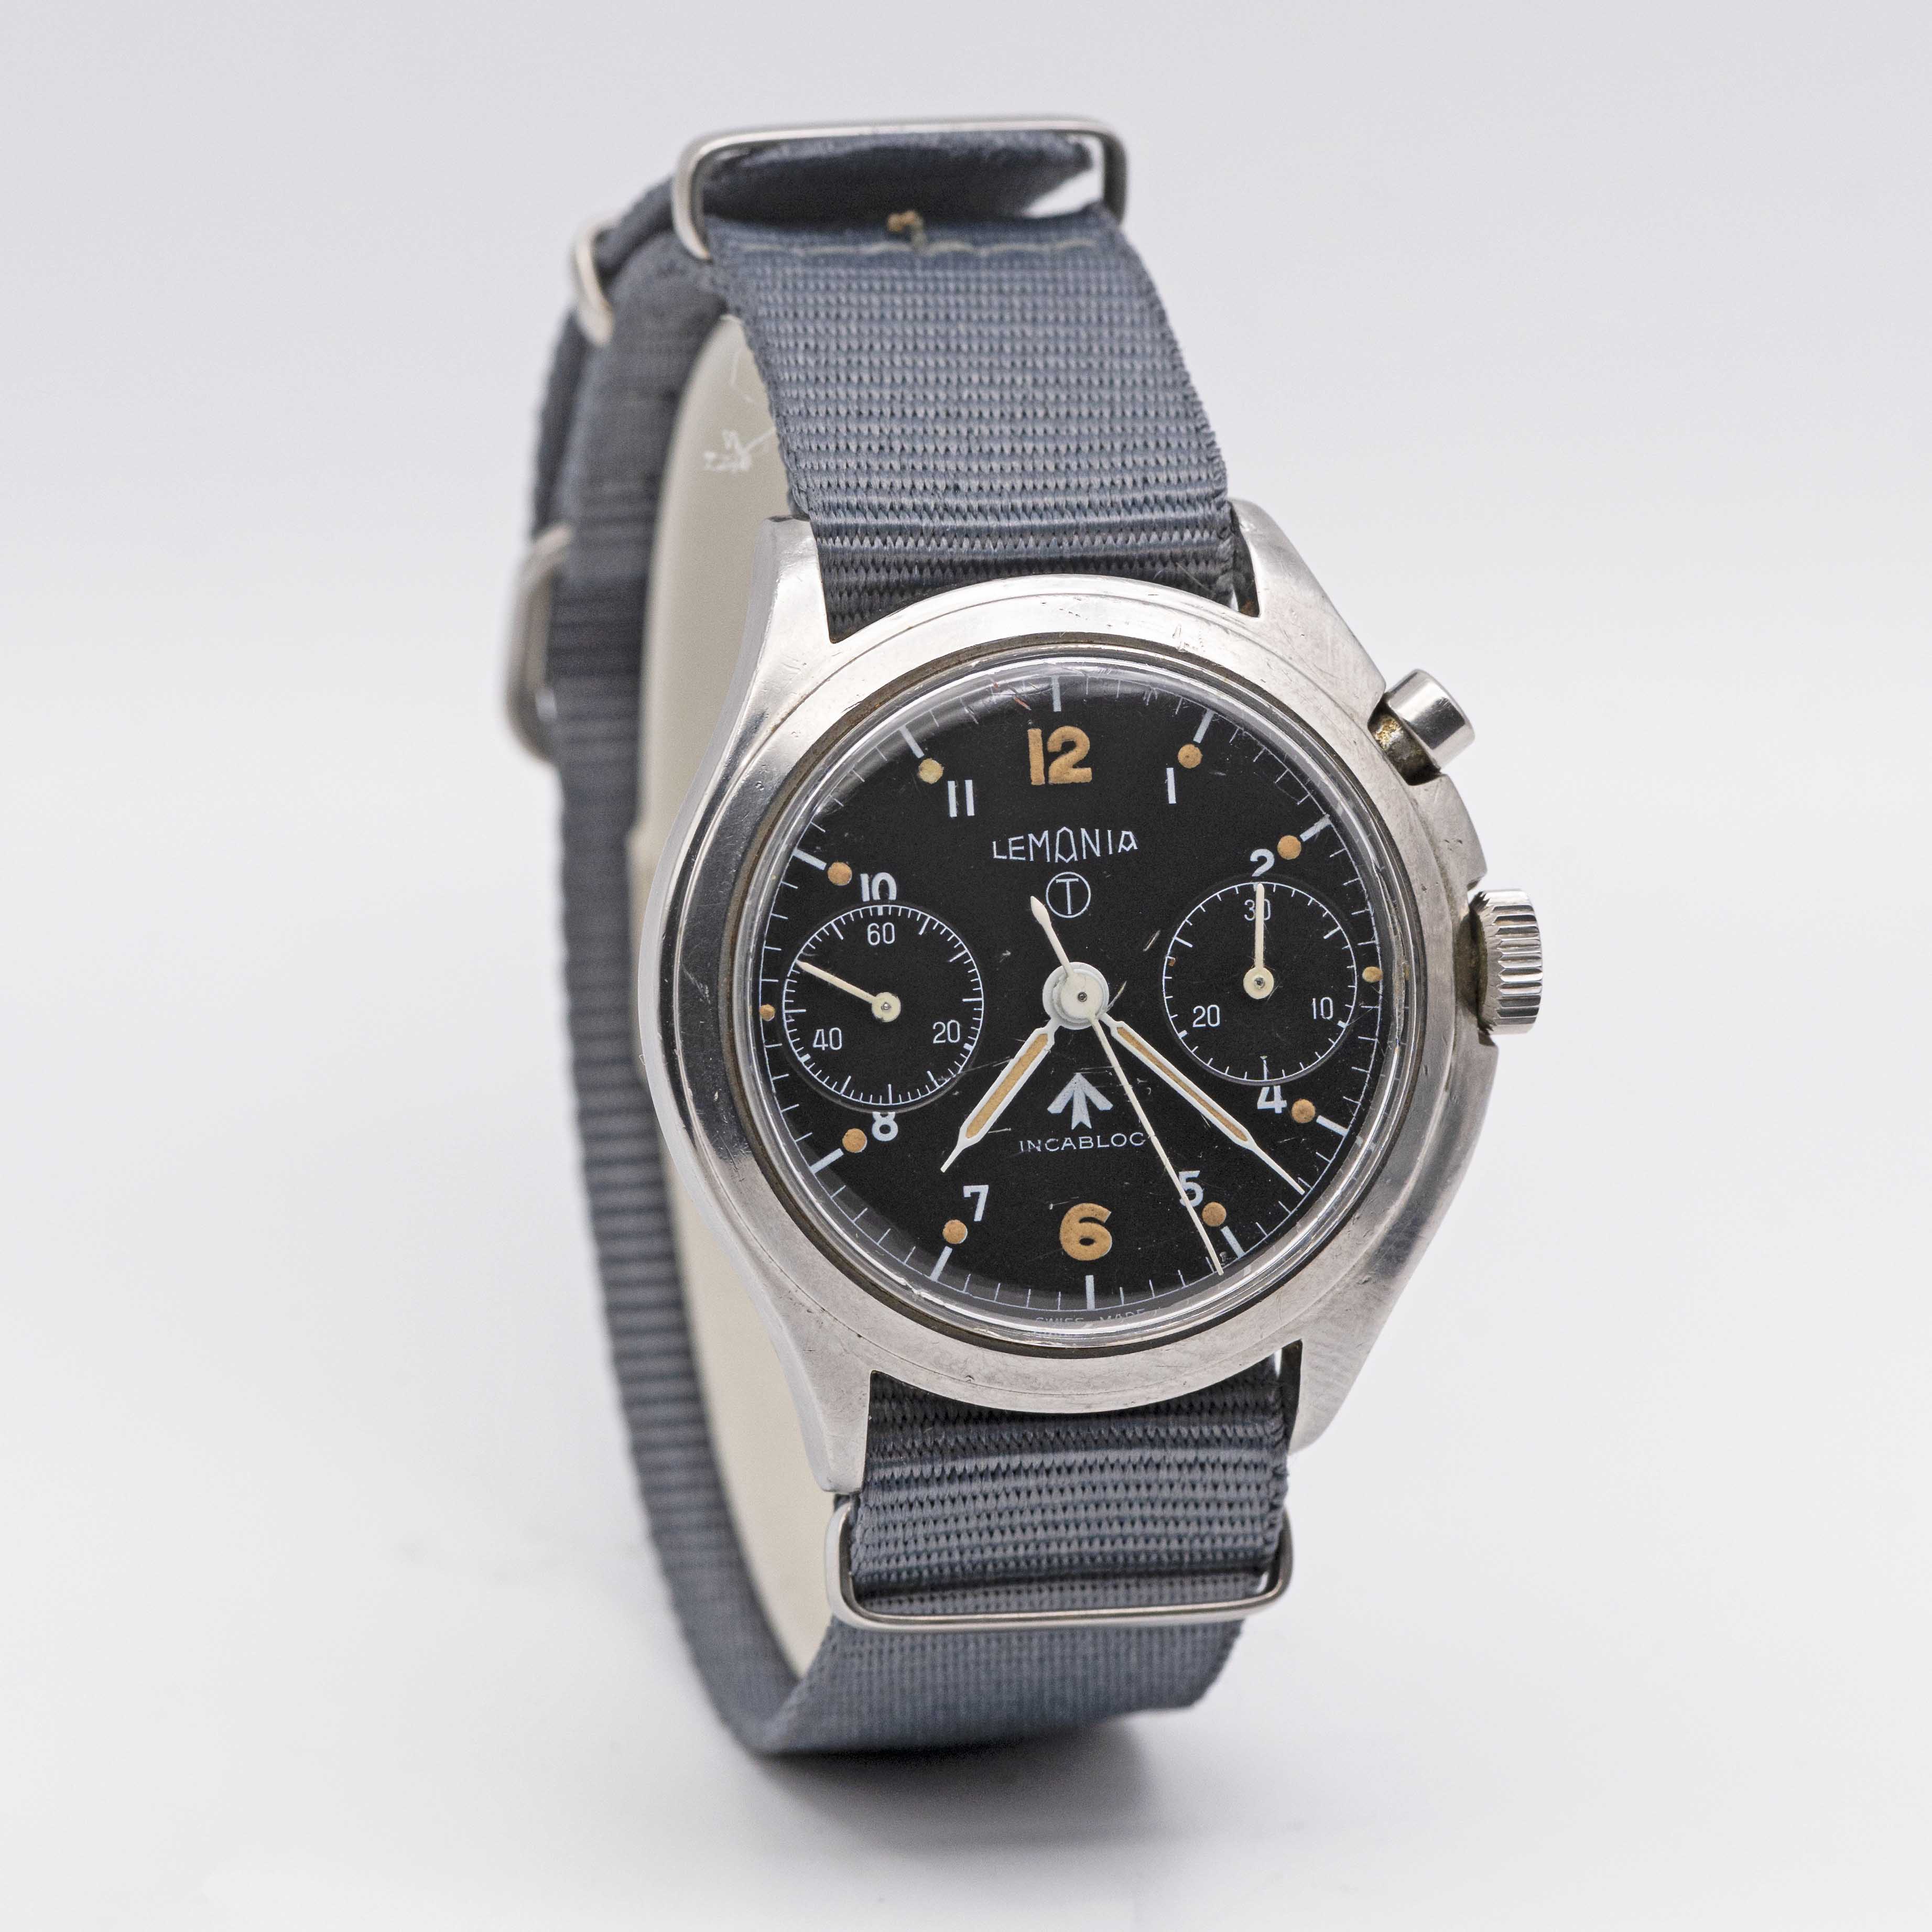 A GENTLEMAN'S STAINLESS STEEL BRITISH MILITARY ROYAL NAVY LEMANIA SINGLE BUTTON CHRONOGRAPH WRIST - Image 4 of 8